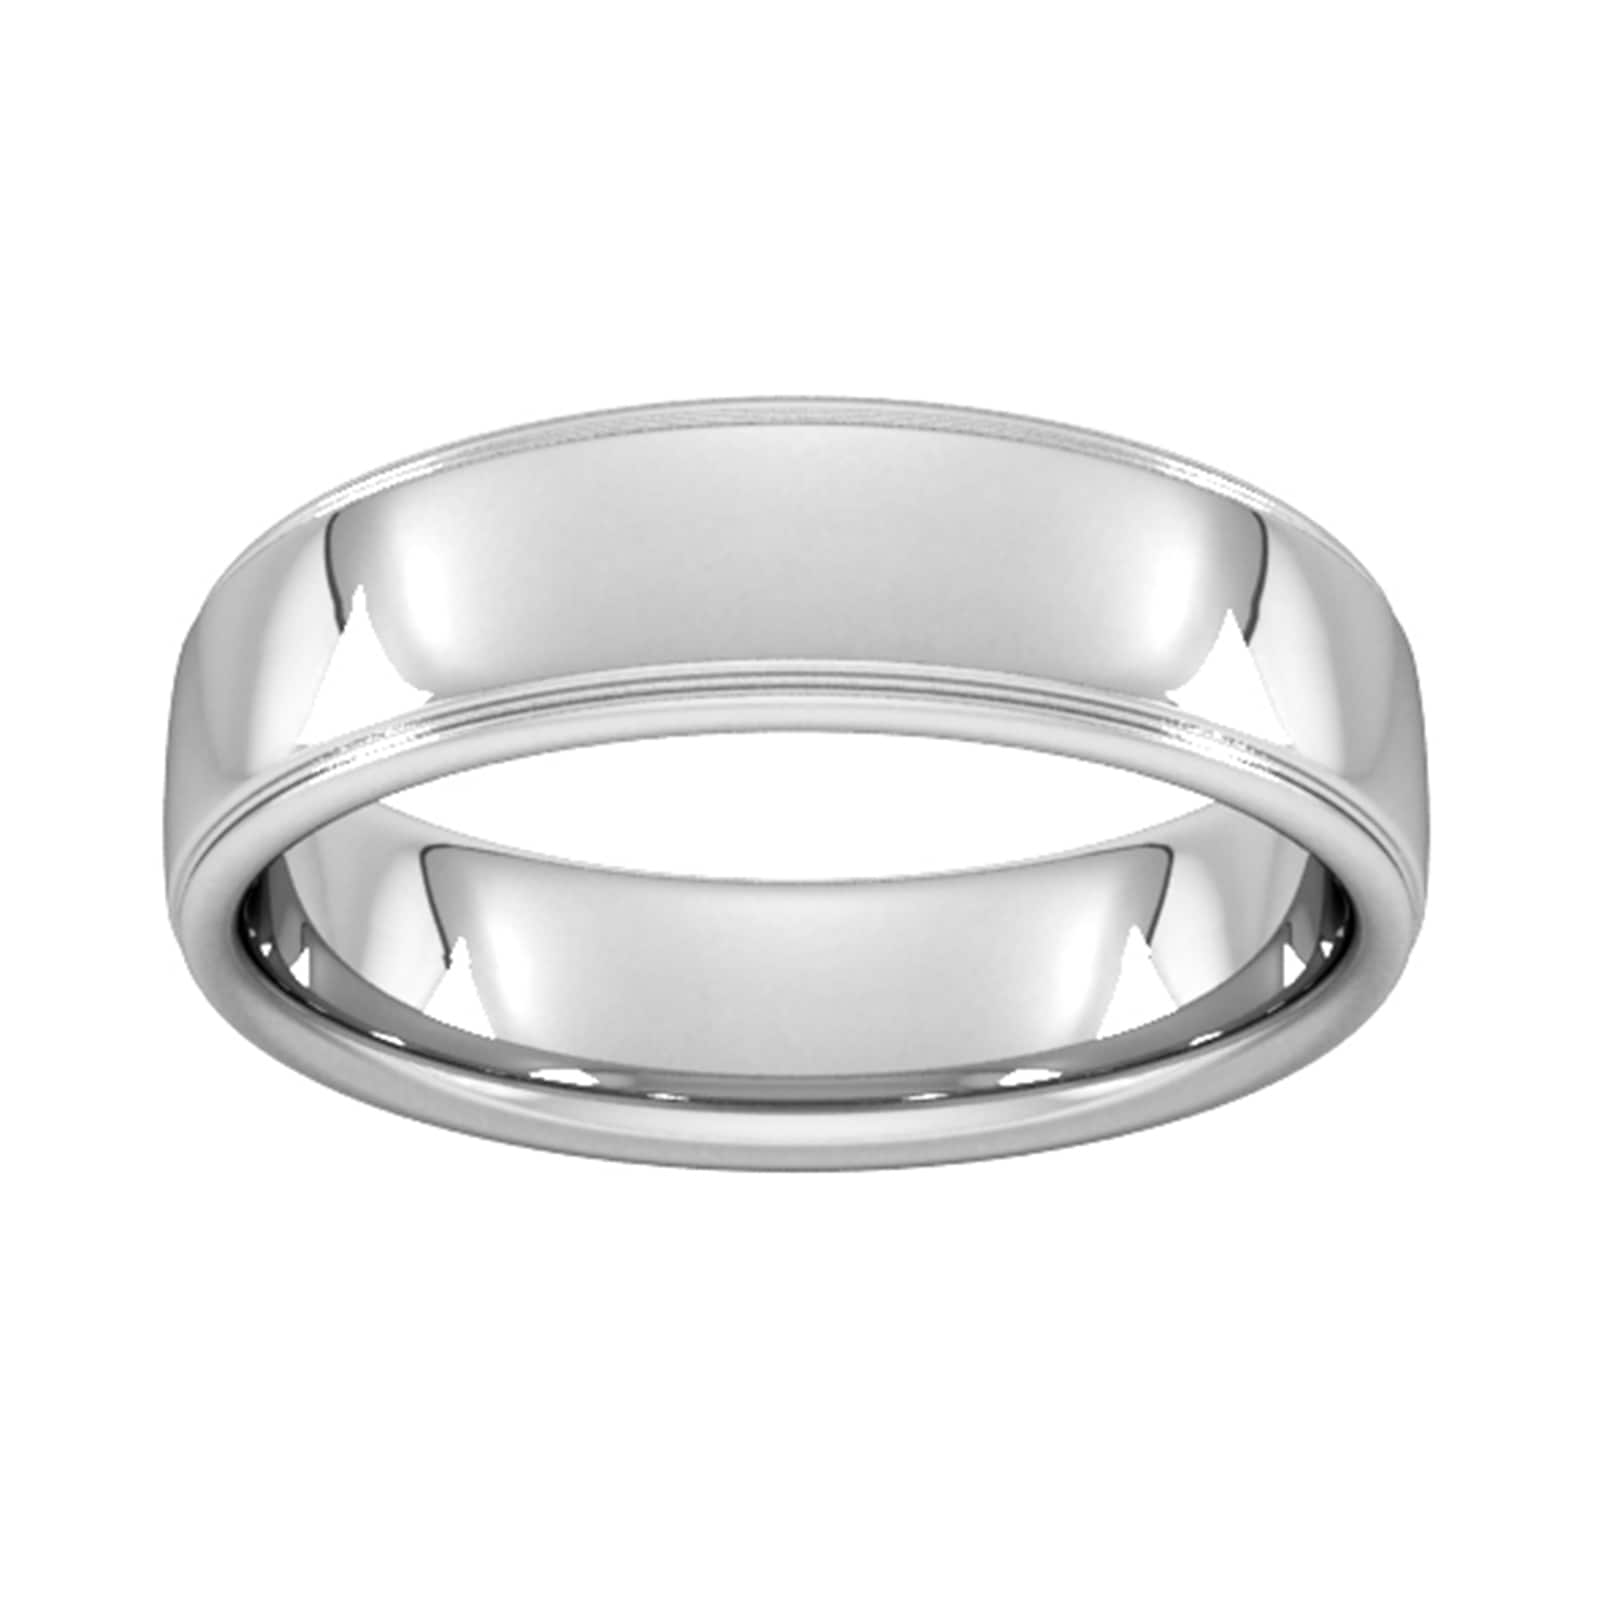 6mm D Shape Heavy Polished Finish With Grooves Wedding Ring In 9 Carat White Gold - Ring Size Y